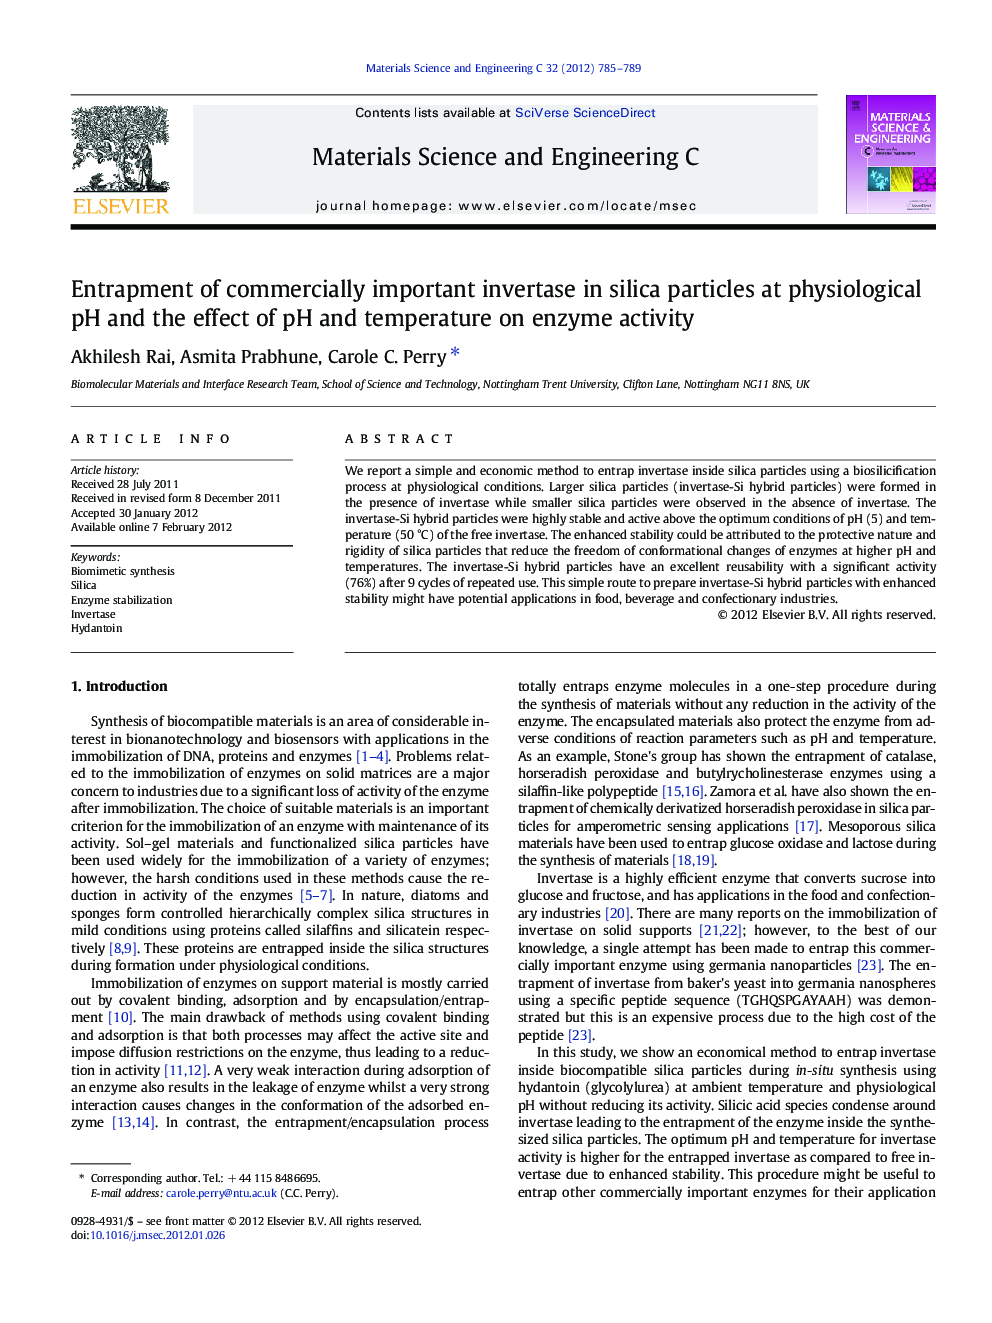 Entrapment of commercially important invertase in silica particles at physiological pH and the effect of pH and temperature on enzyme activity